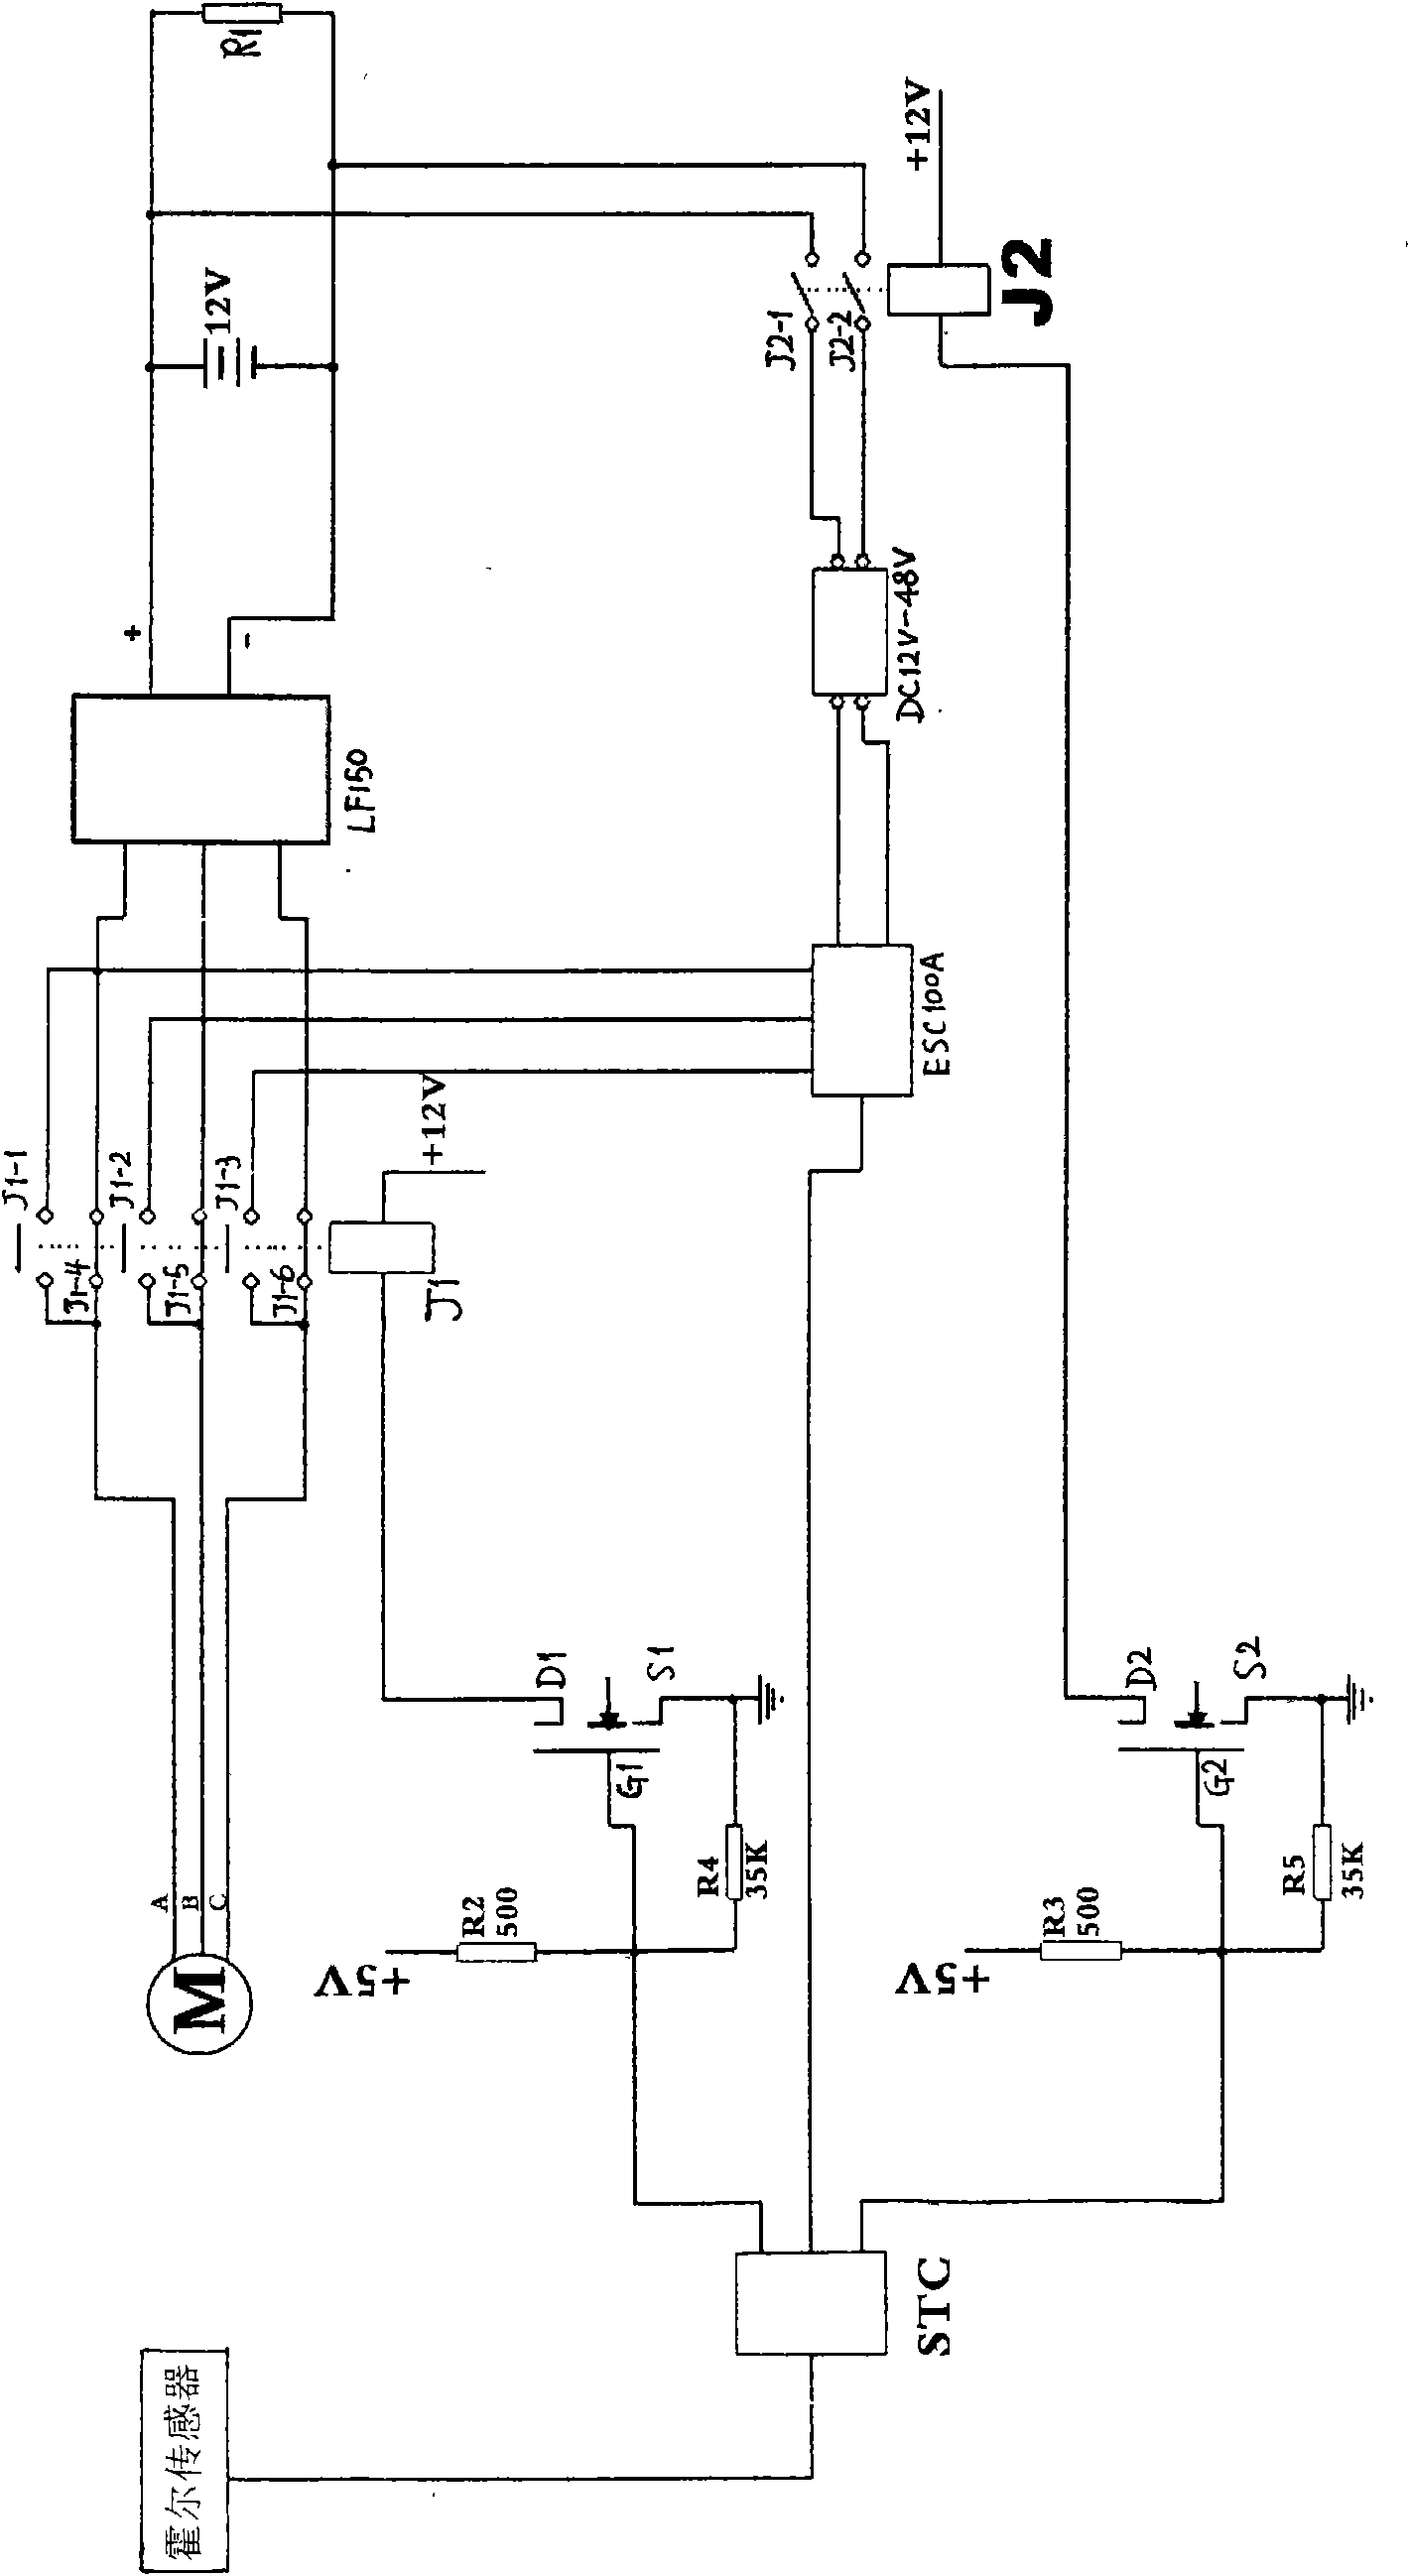 Control device of starting and generating integrated system used for small-sized internal-combustion engine